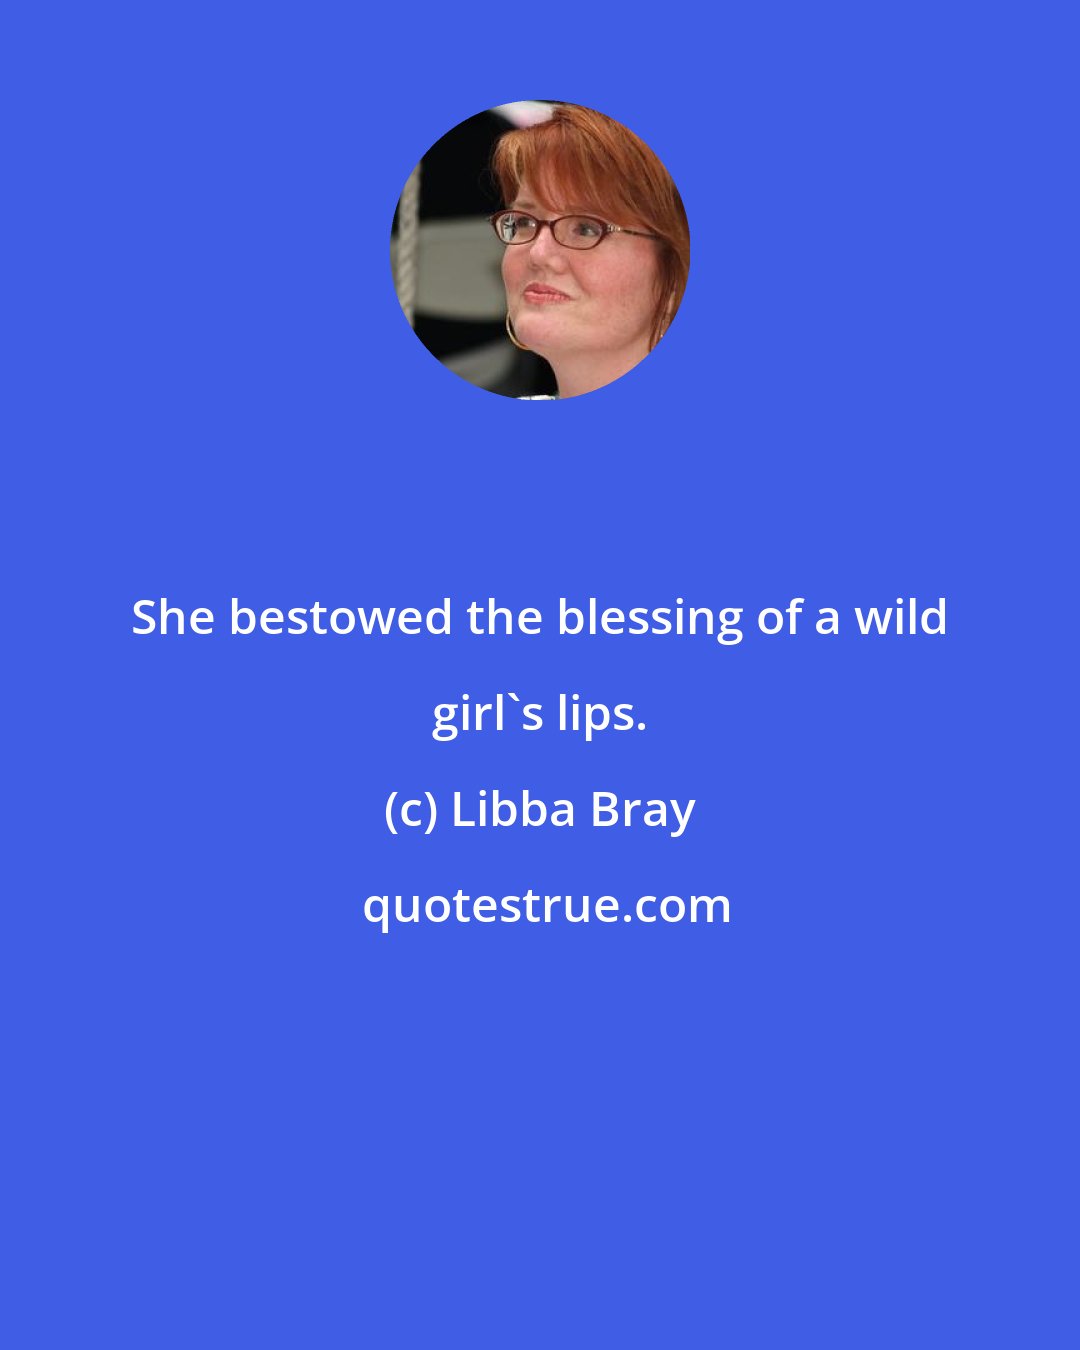 Libba Bray: She bestowed the blessing of a wild girl's lips.